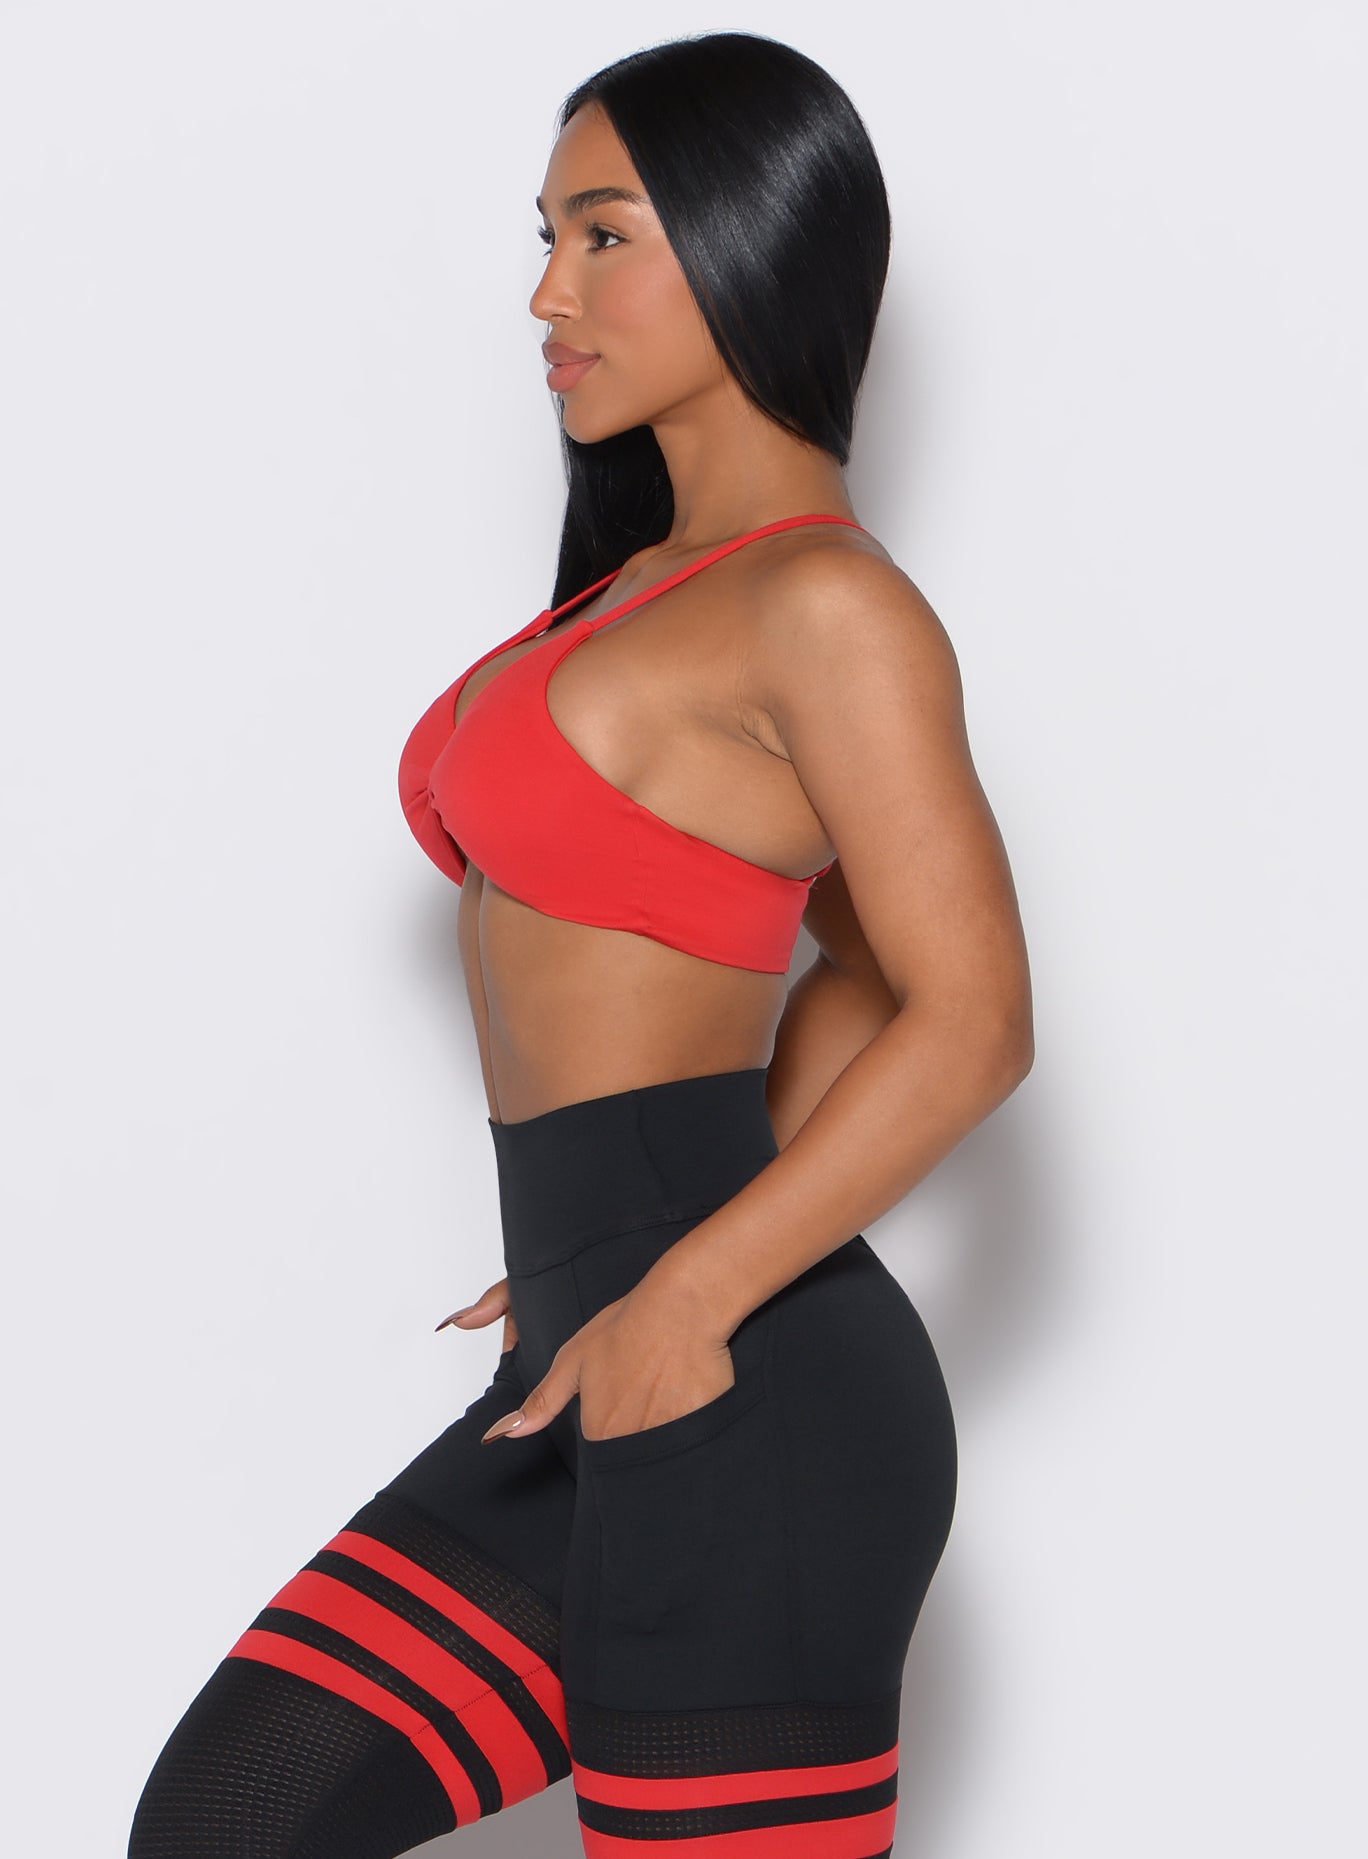 Left side profile view of a model with both her hands in the pockets of her leggings wearing our Twist Mini Bra in Fire color